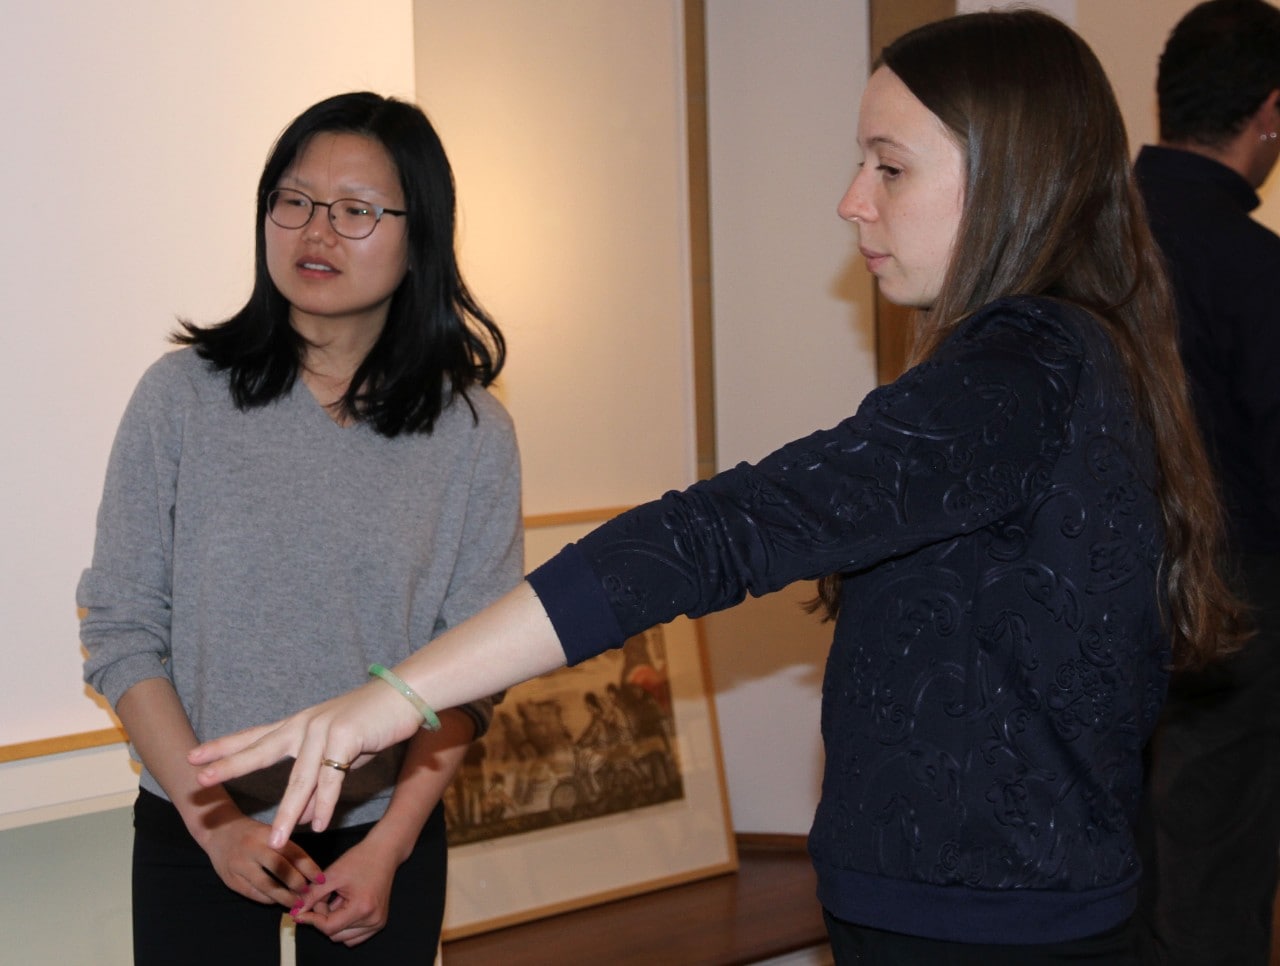 Bingqing Wei and Minerva Inwald at the exhibition's install. 